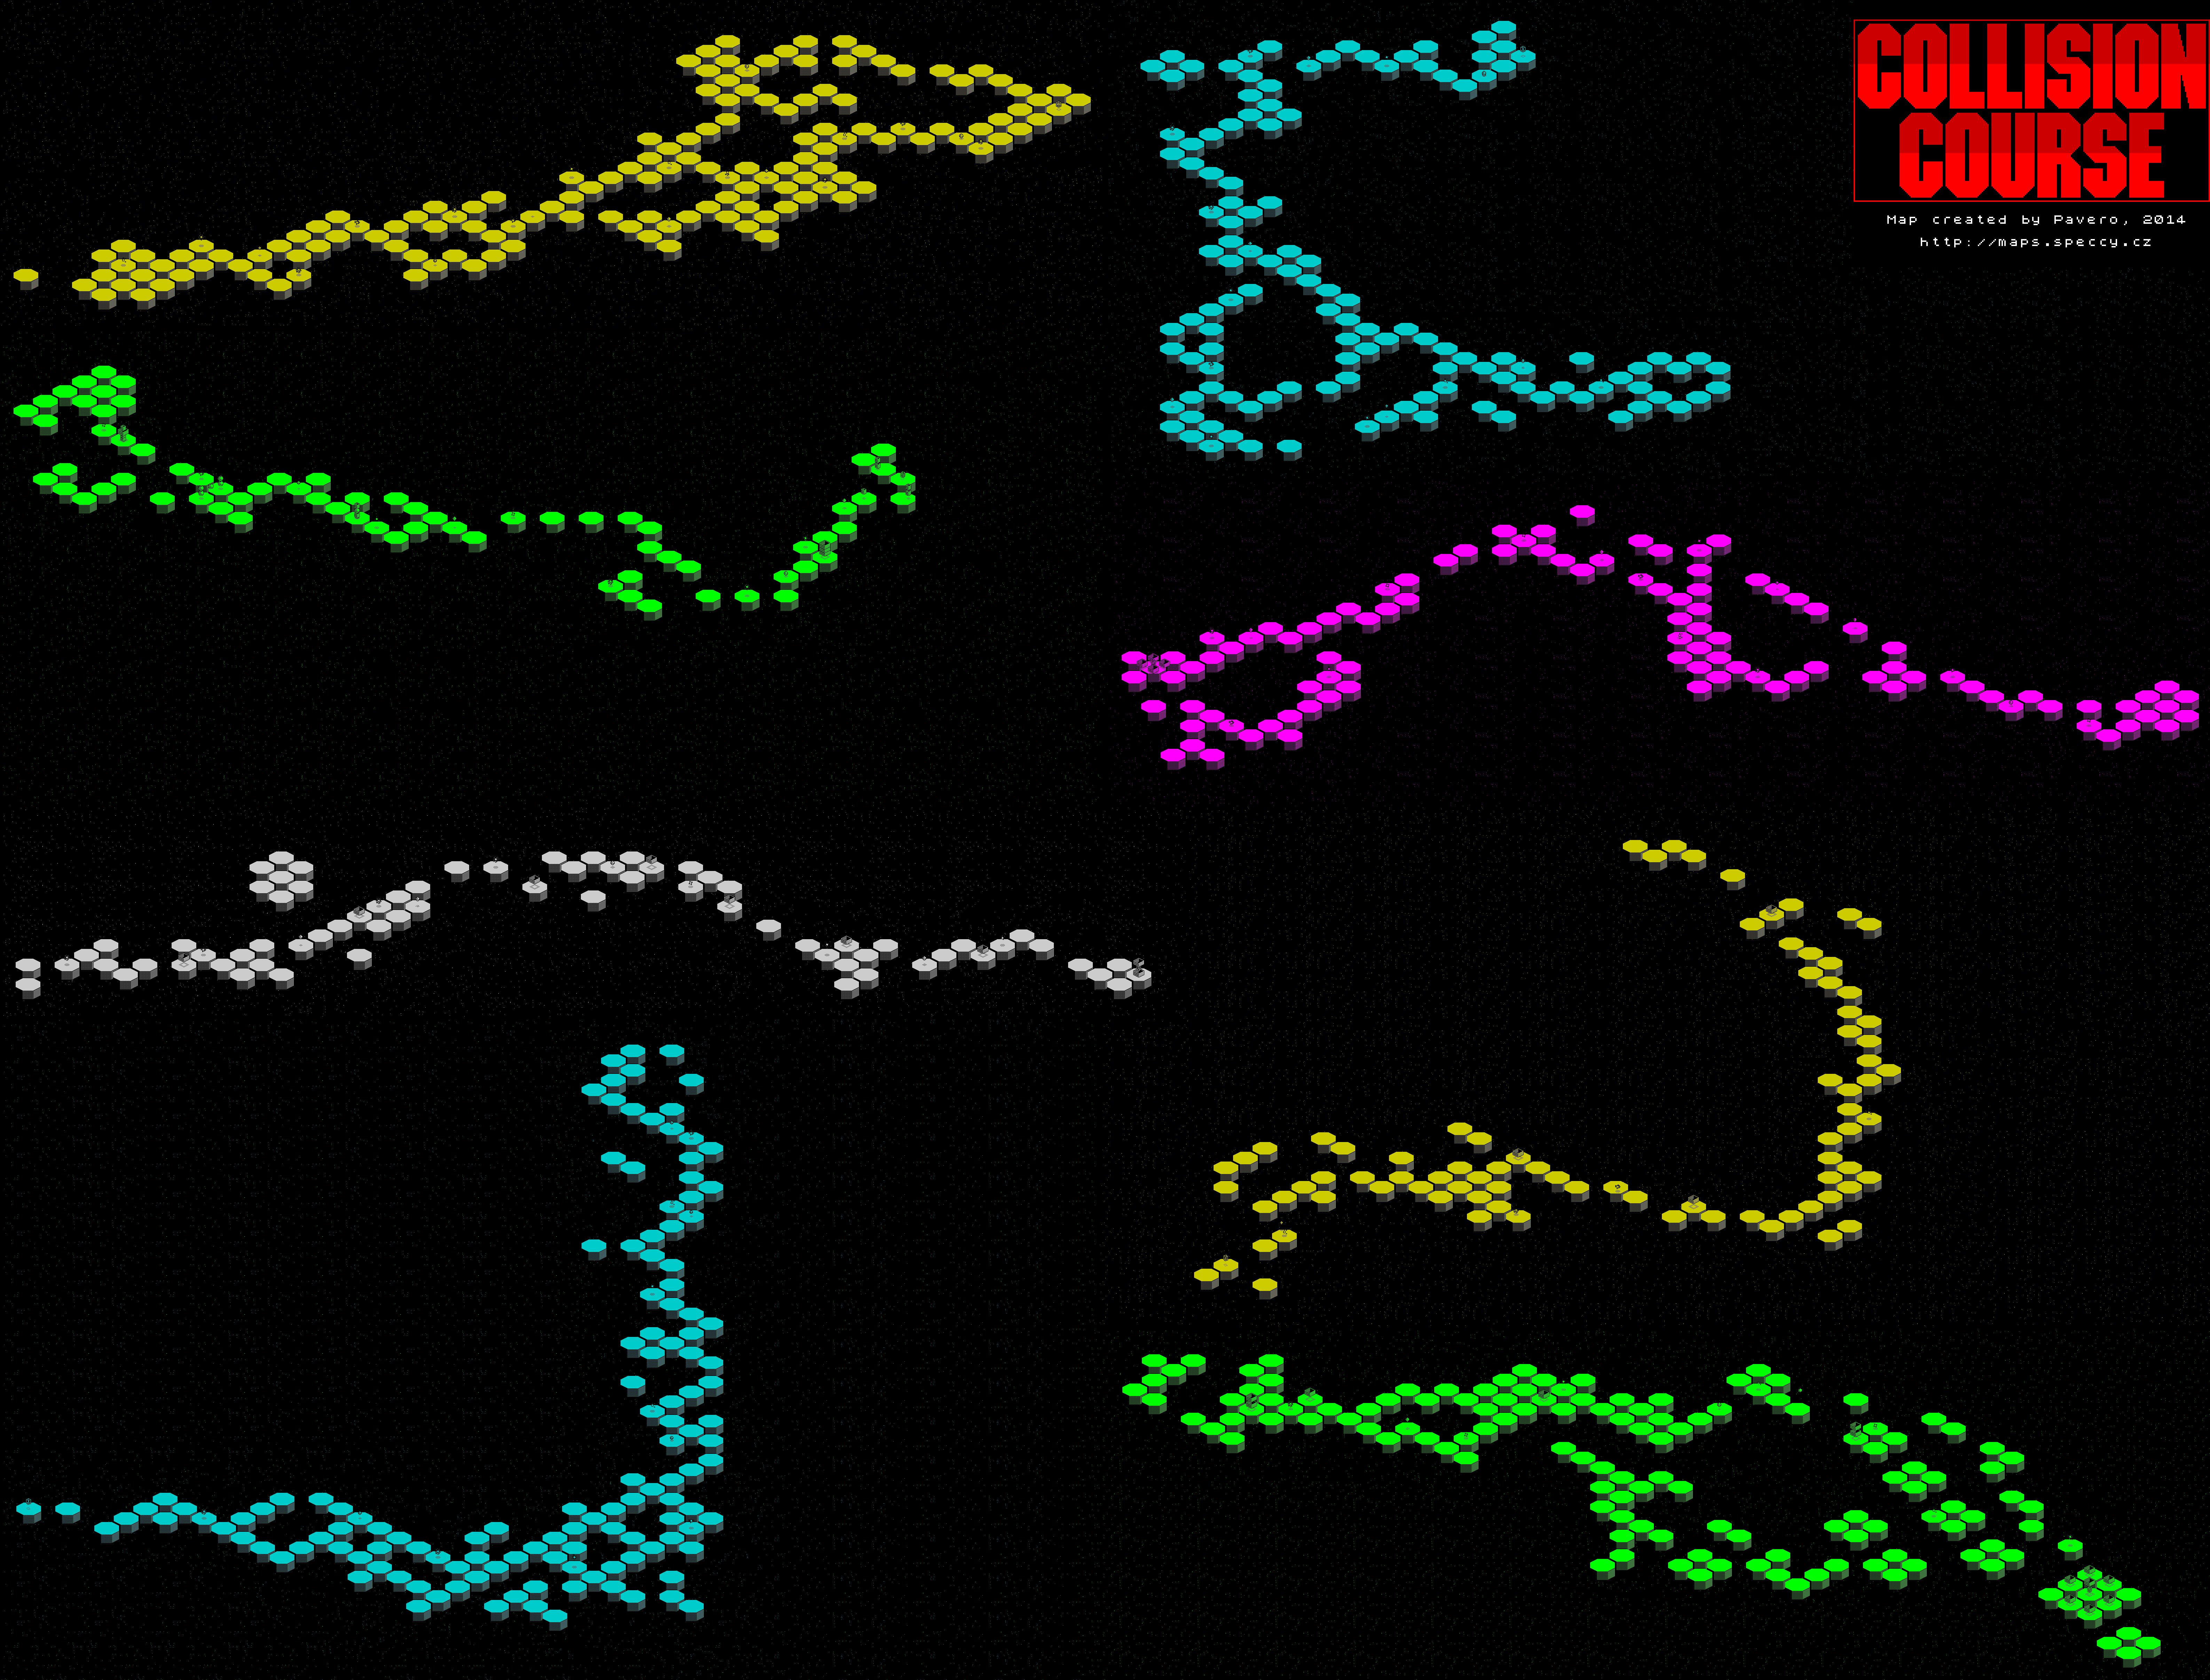 Collision Course - The Map